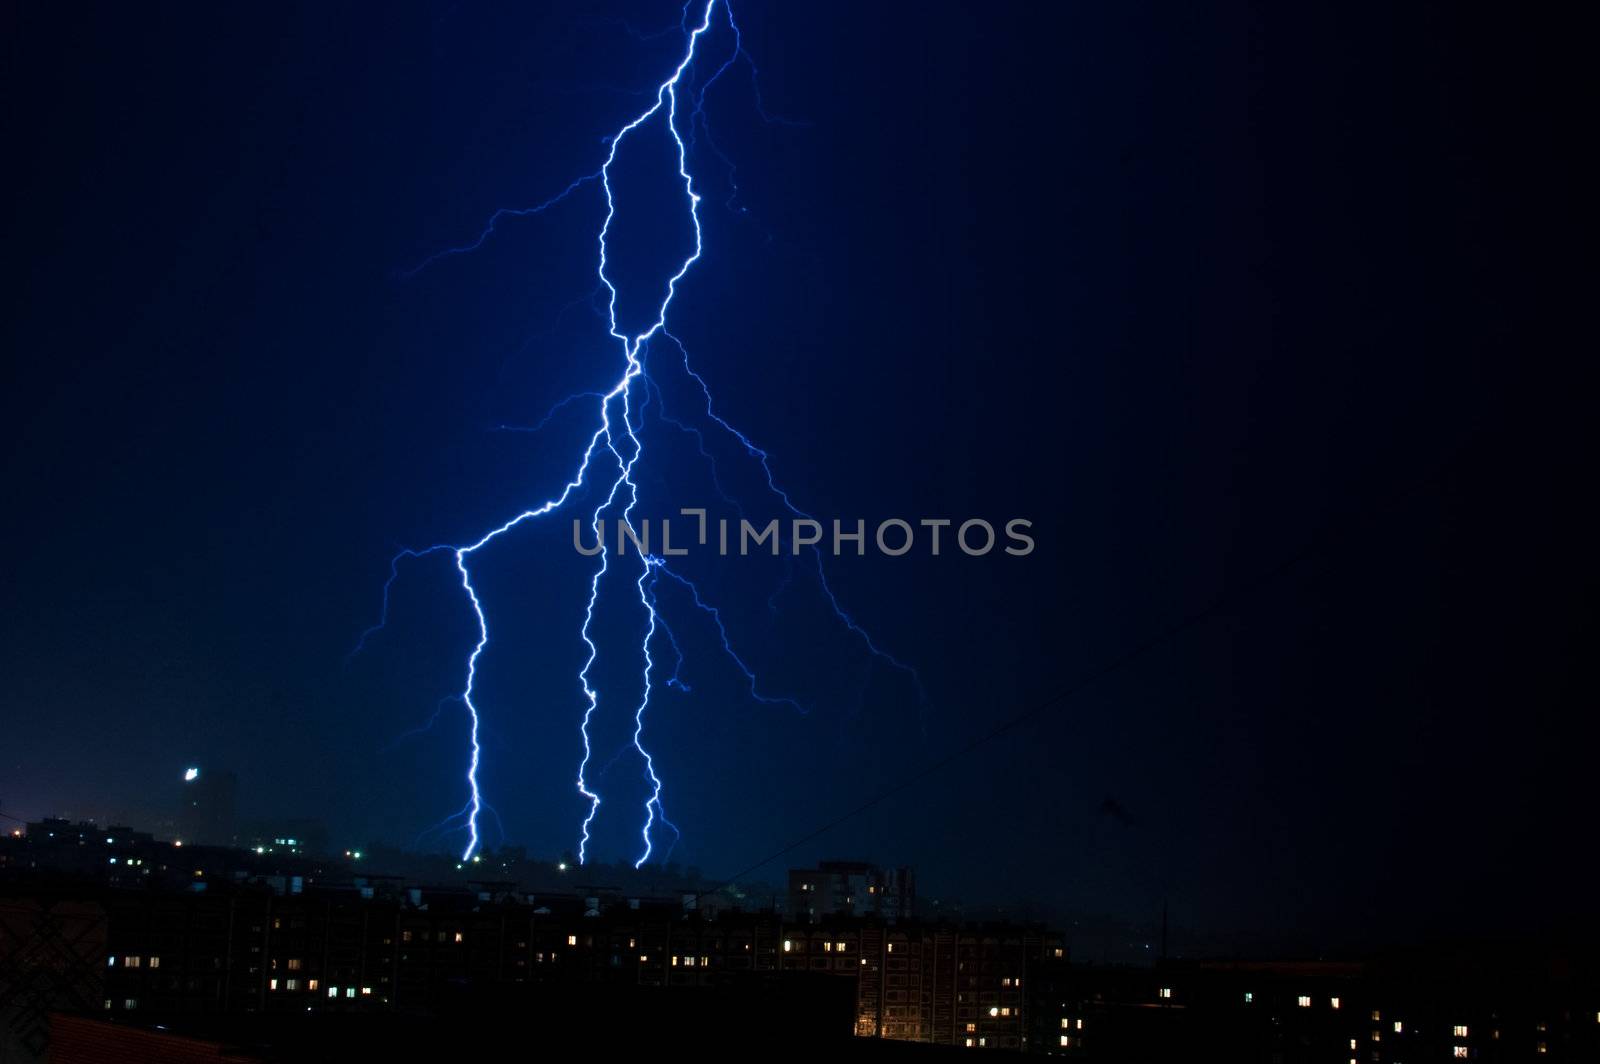 vertical lightning over the city at night. Sky before the storm